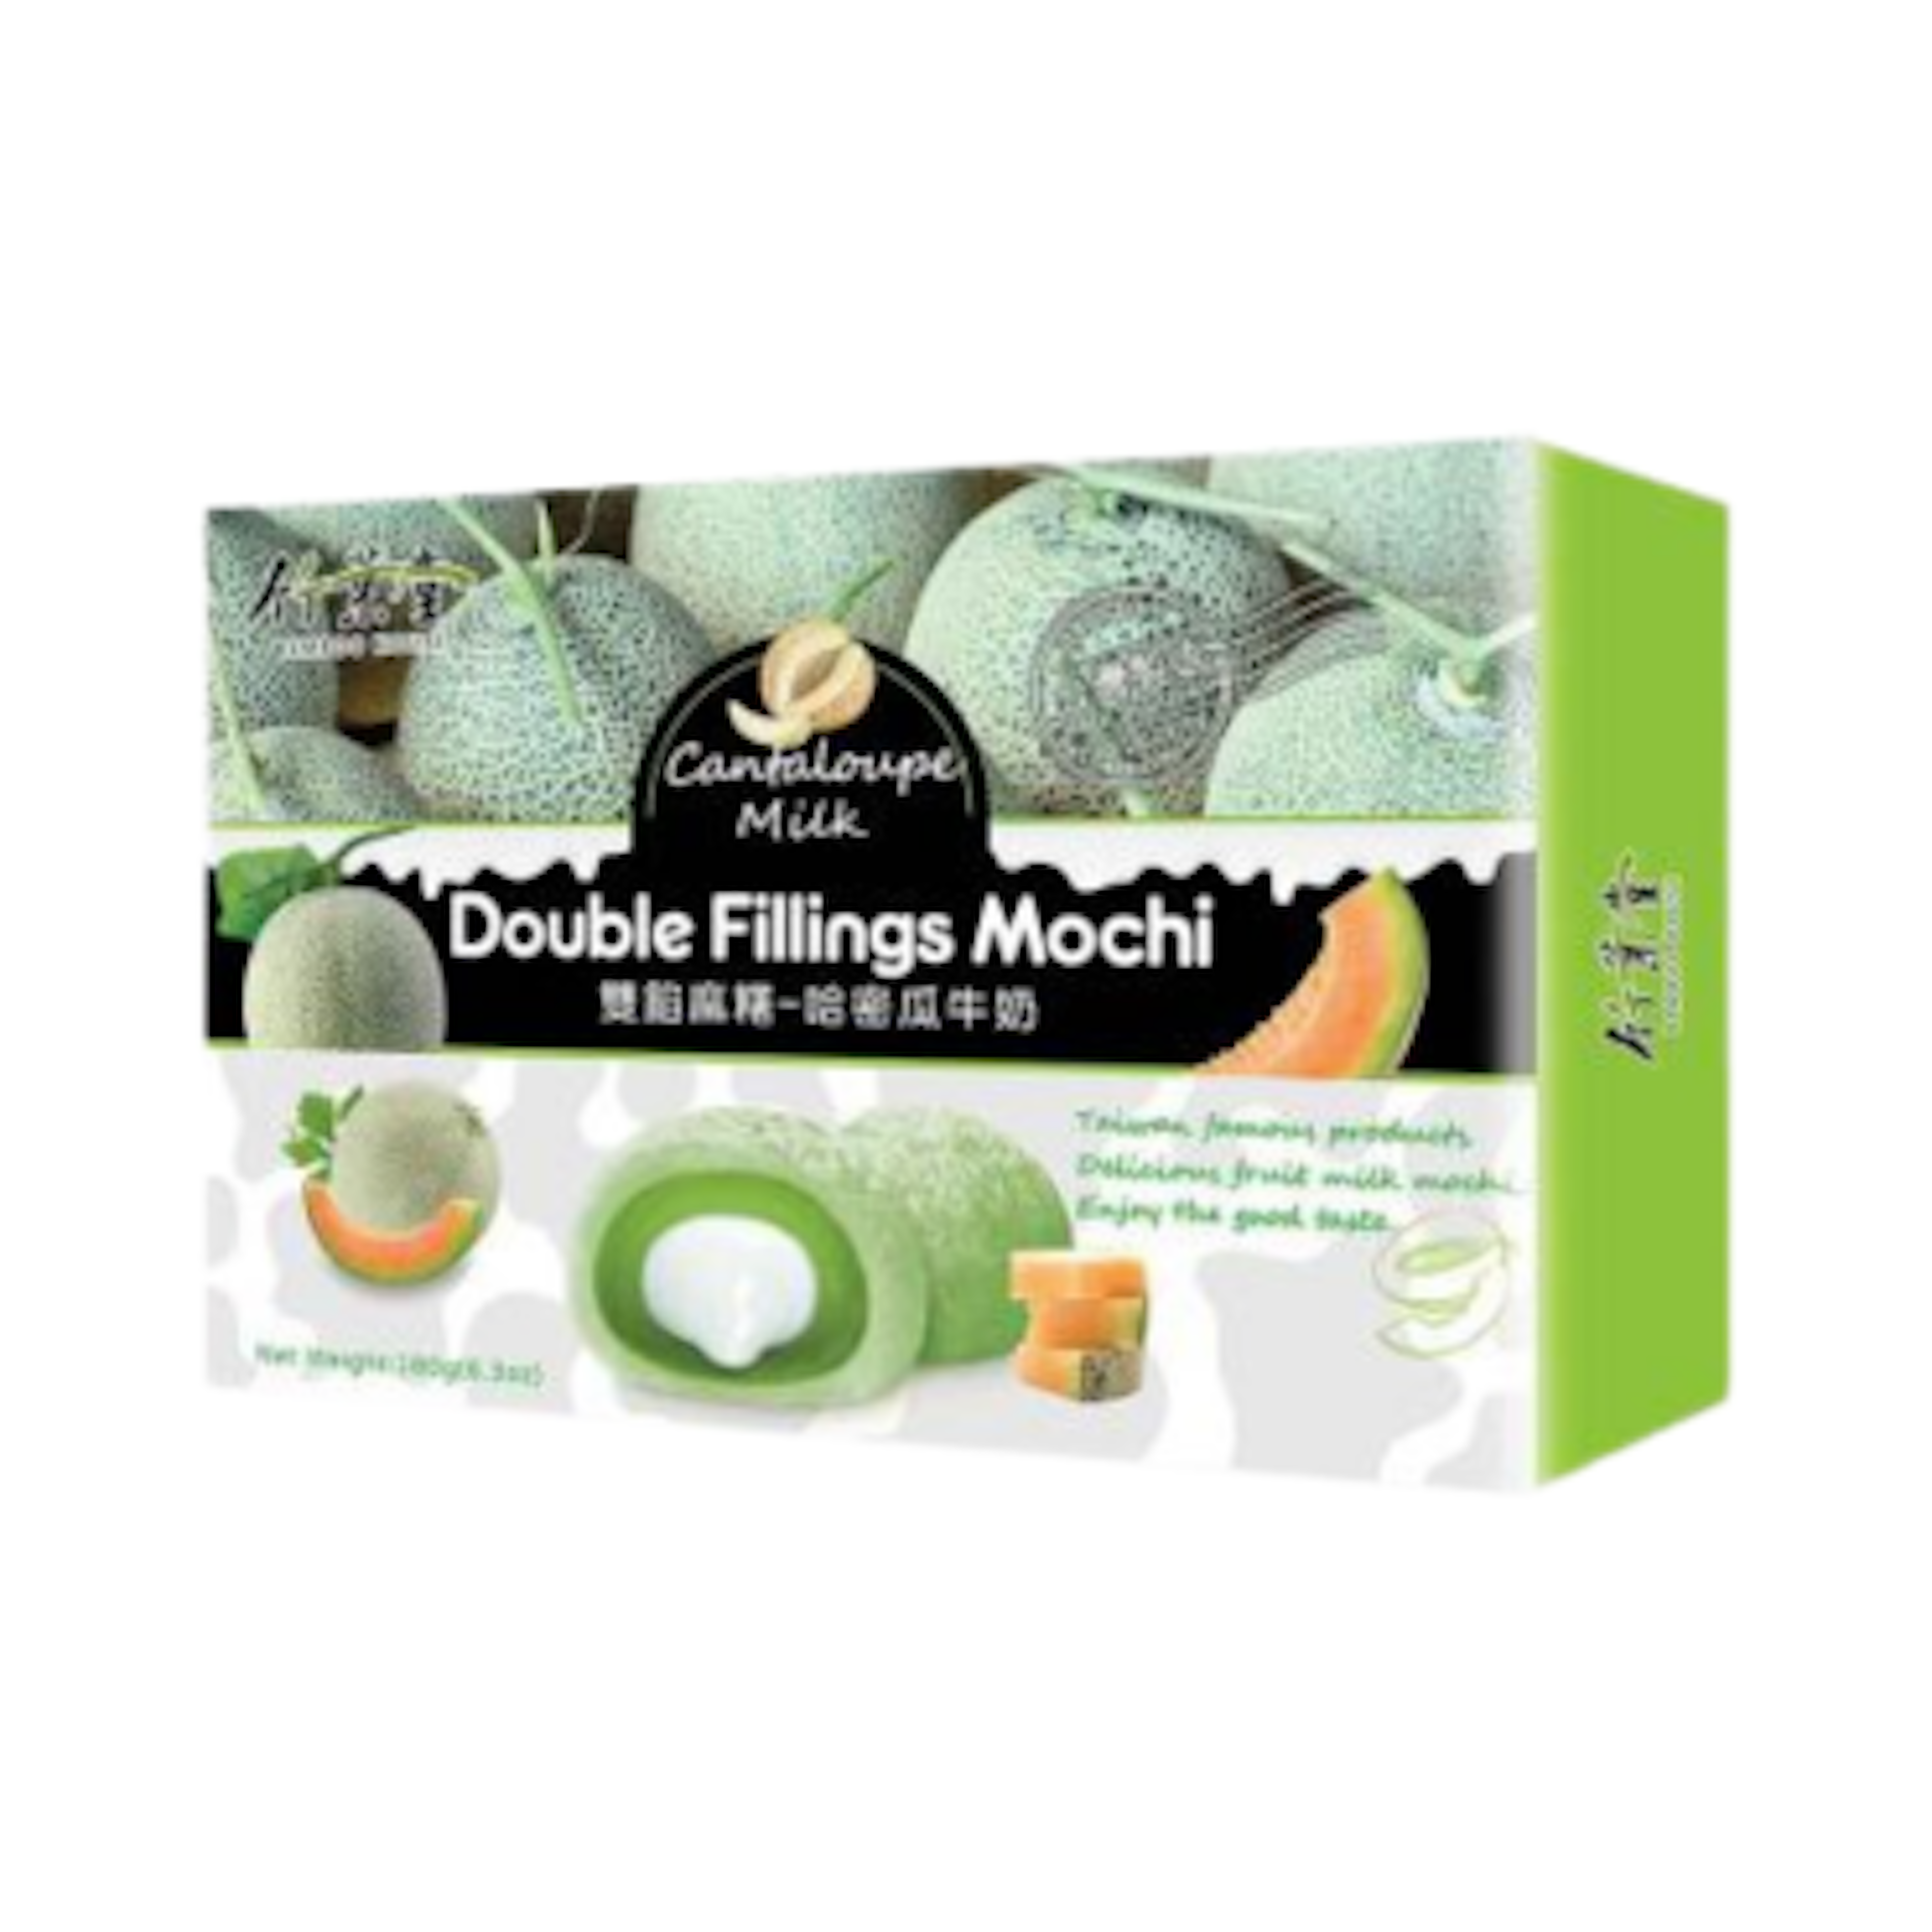 Bamboo House Double Fillings Mochi Cantaloupe Milk 180g - Delicious and Tender Japanese Sweet